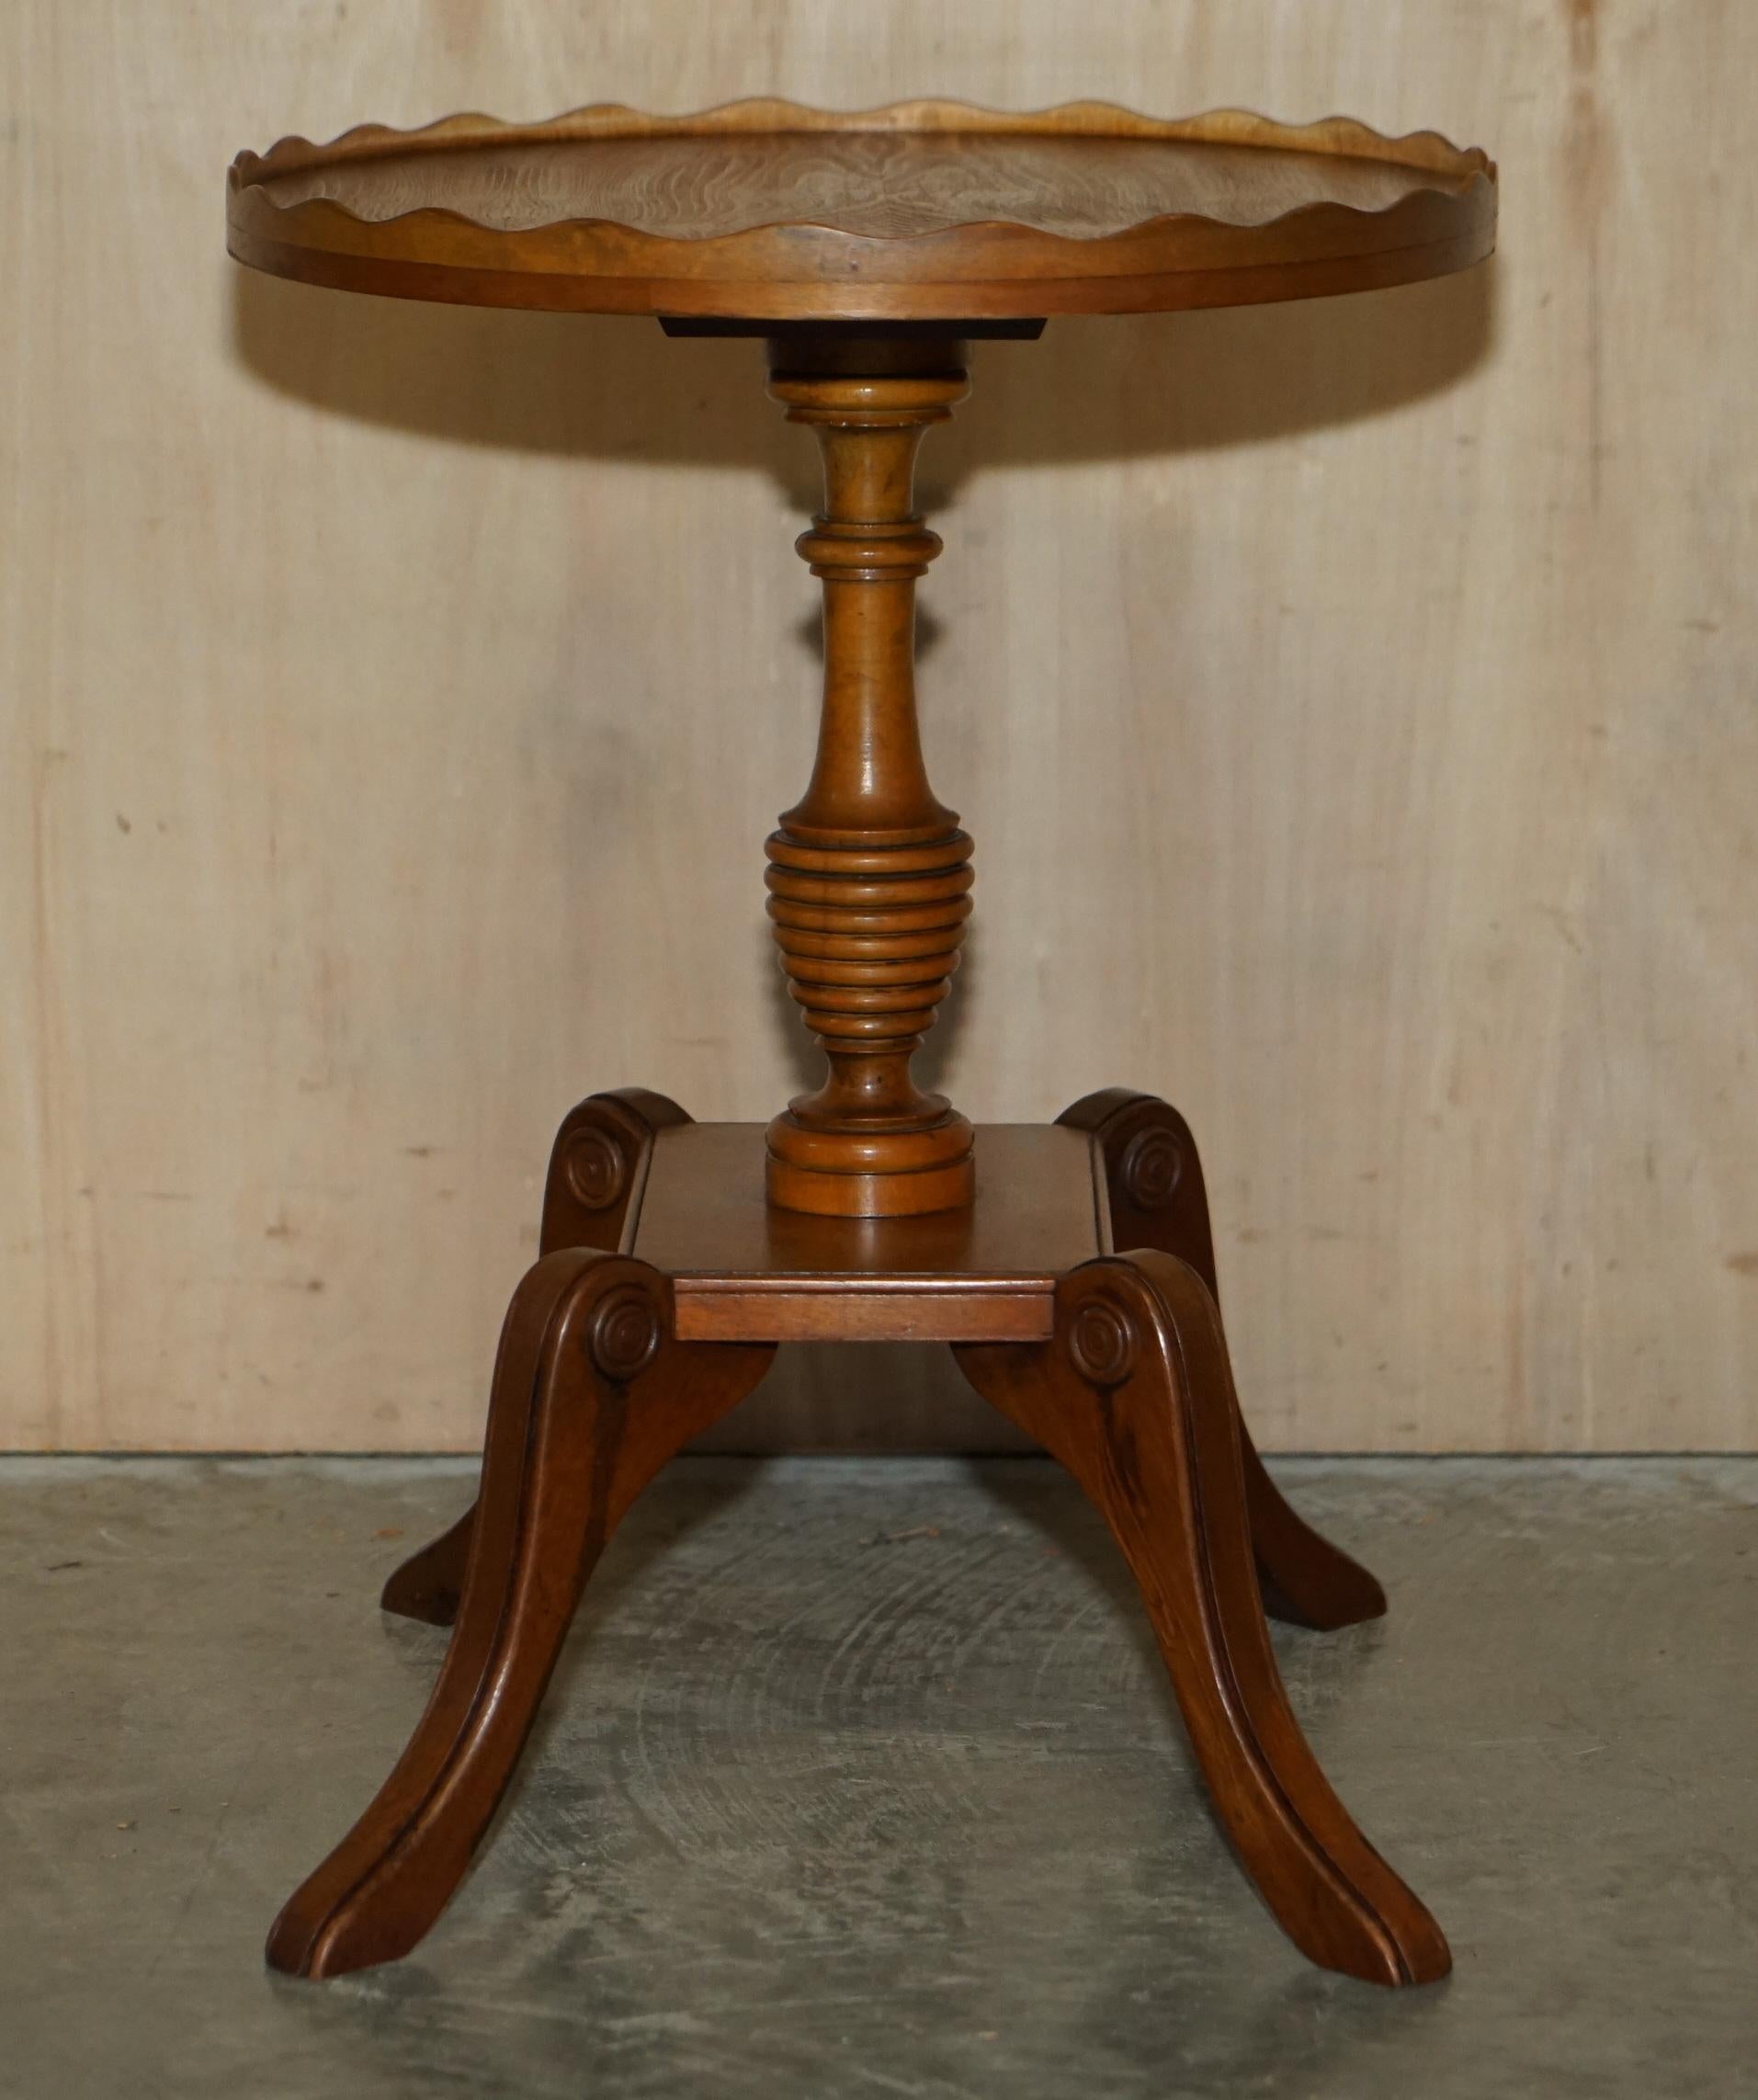 Pair of Burr Yew Wood Beresford & Hicks Side End Lamp Tables with Gallery Rail For Sale 6